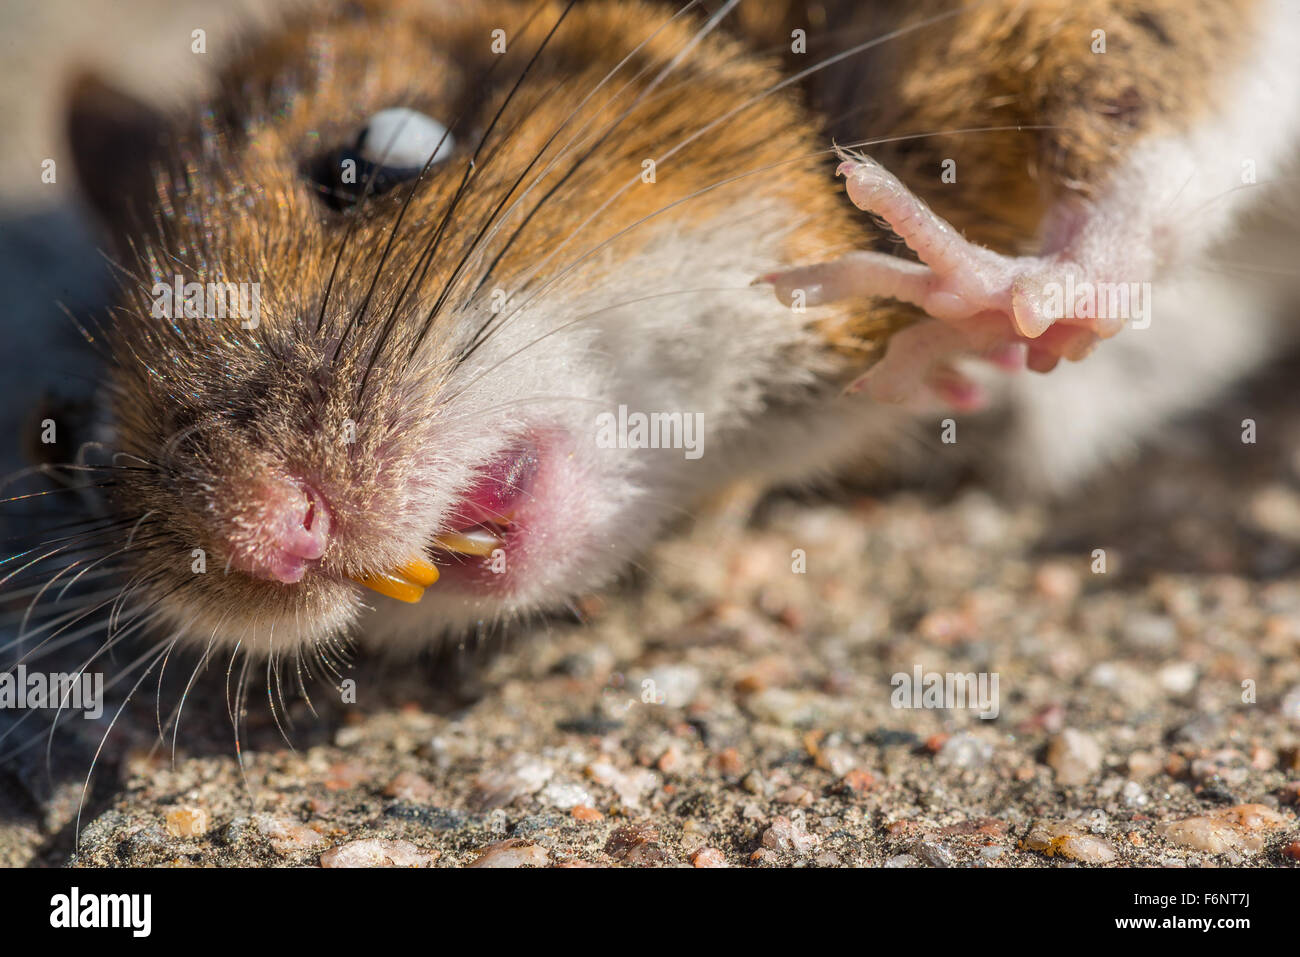 Closeup of dead mouse on ground Stock Photo